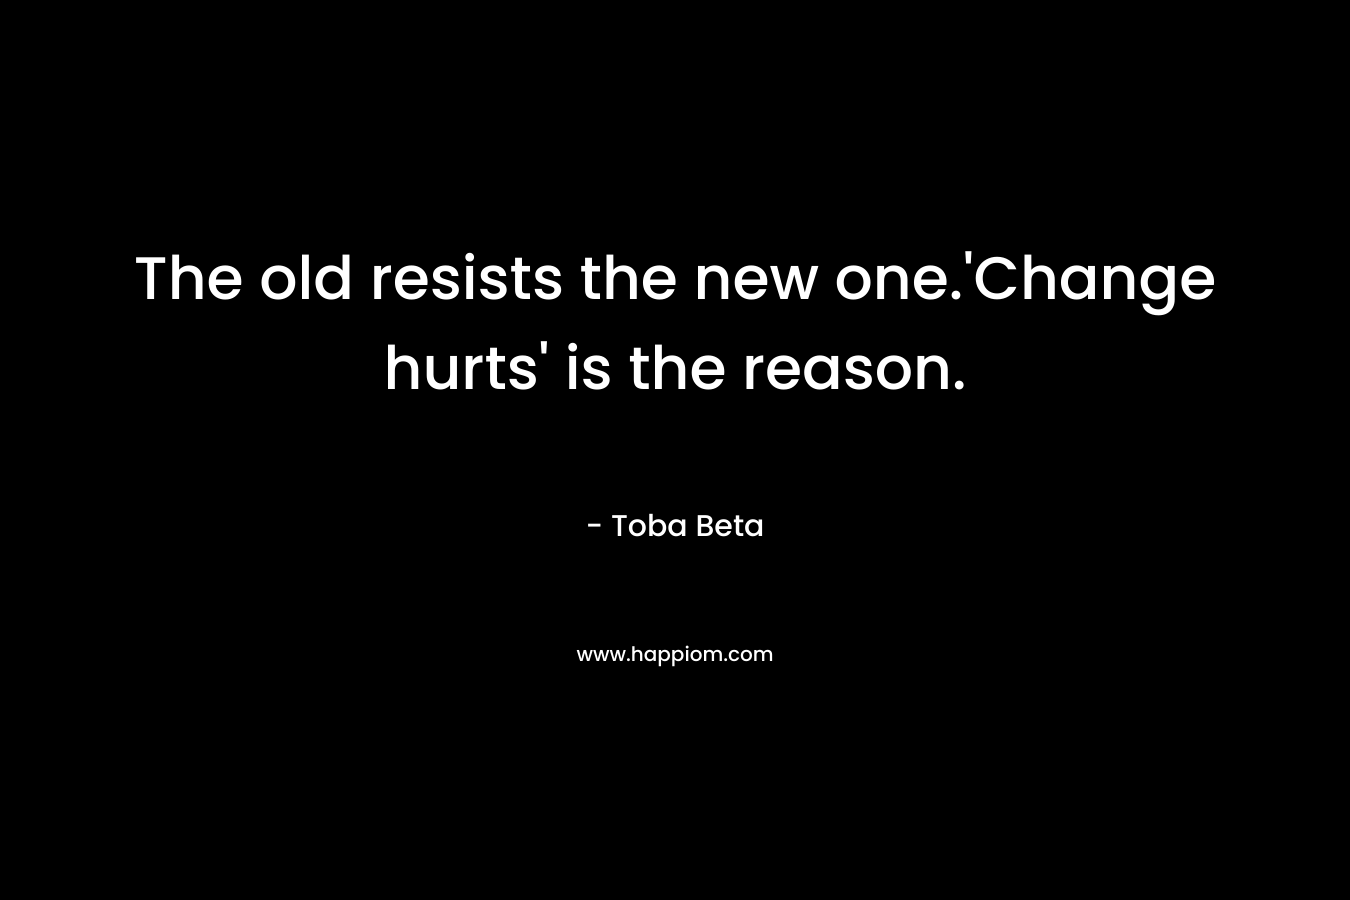 The old resists the new one.’Change hurts’ is the reason. – Toba Beta